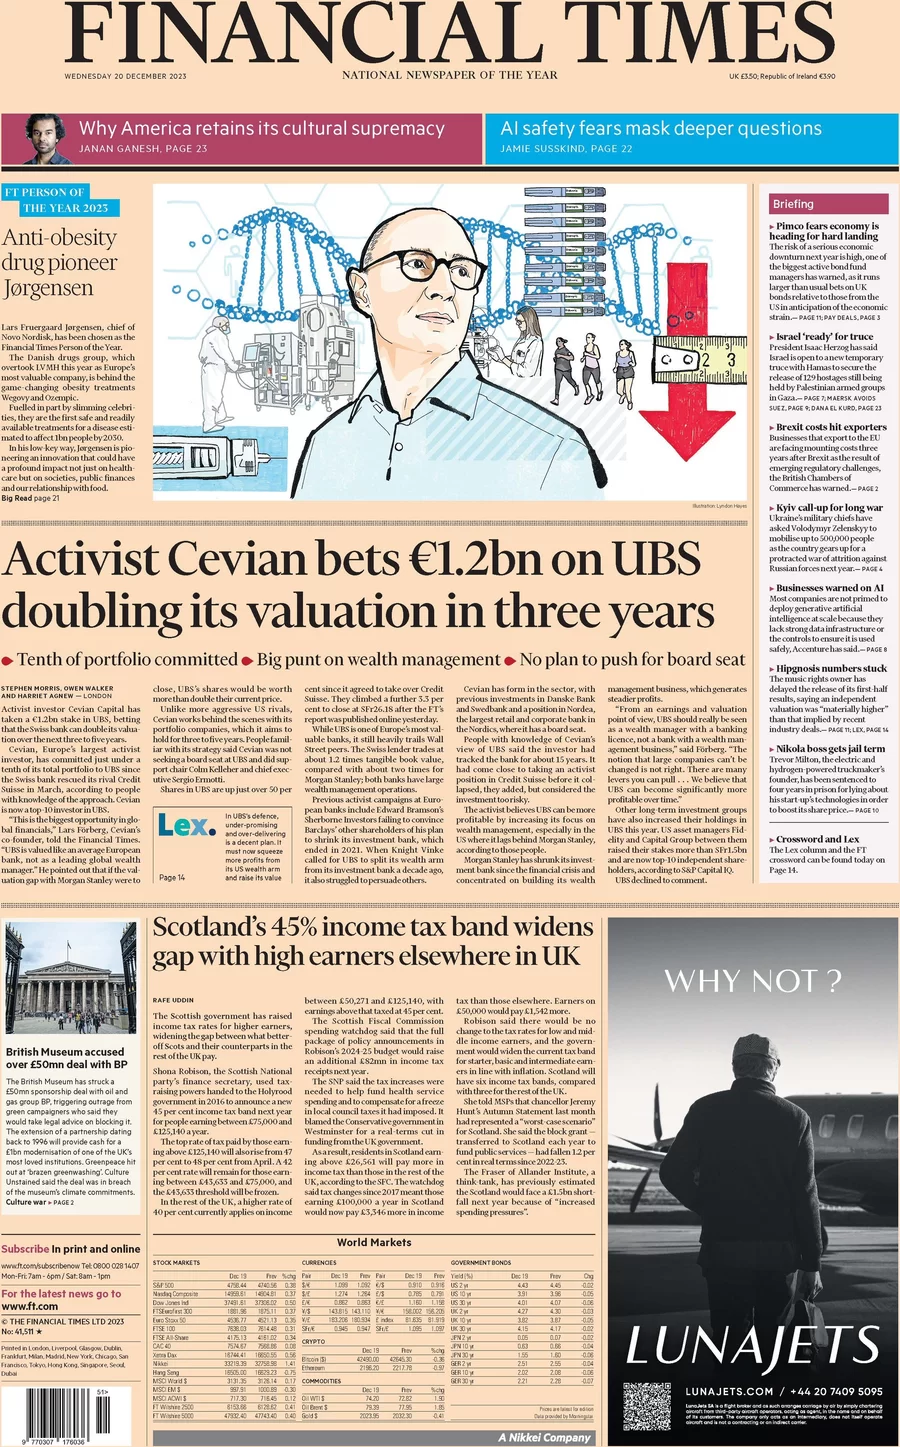 Financial Times - Activist Cevian bets €1.2bn on UBS doubling its valuation in three years 